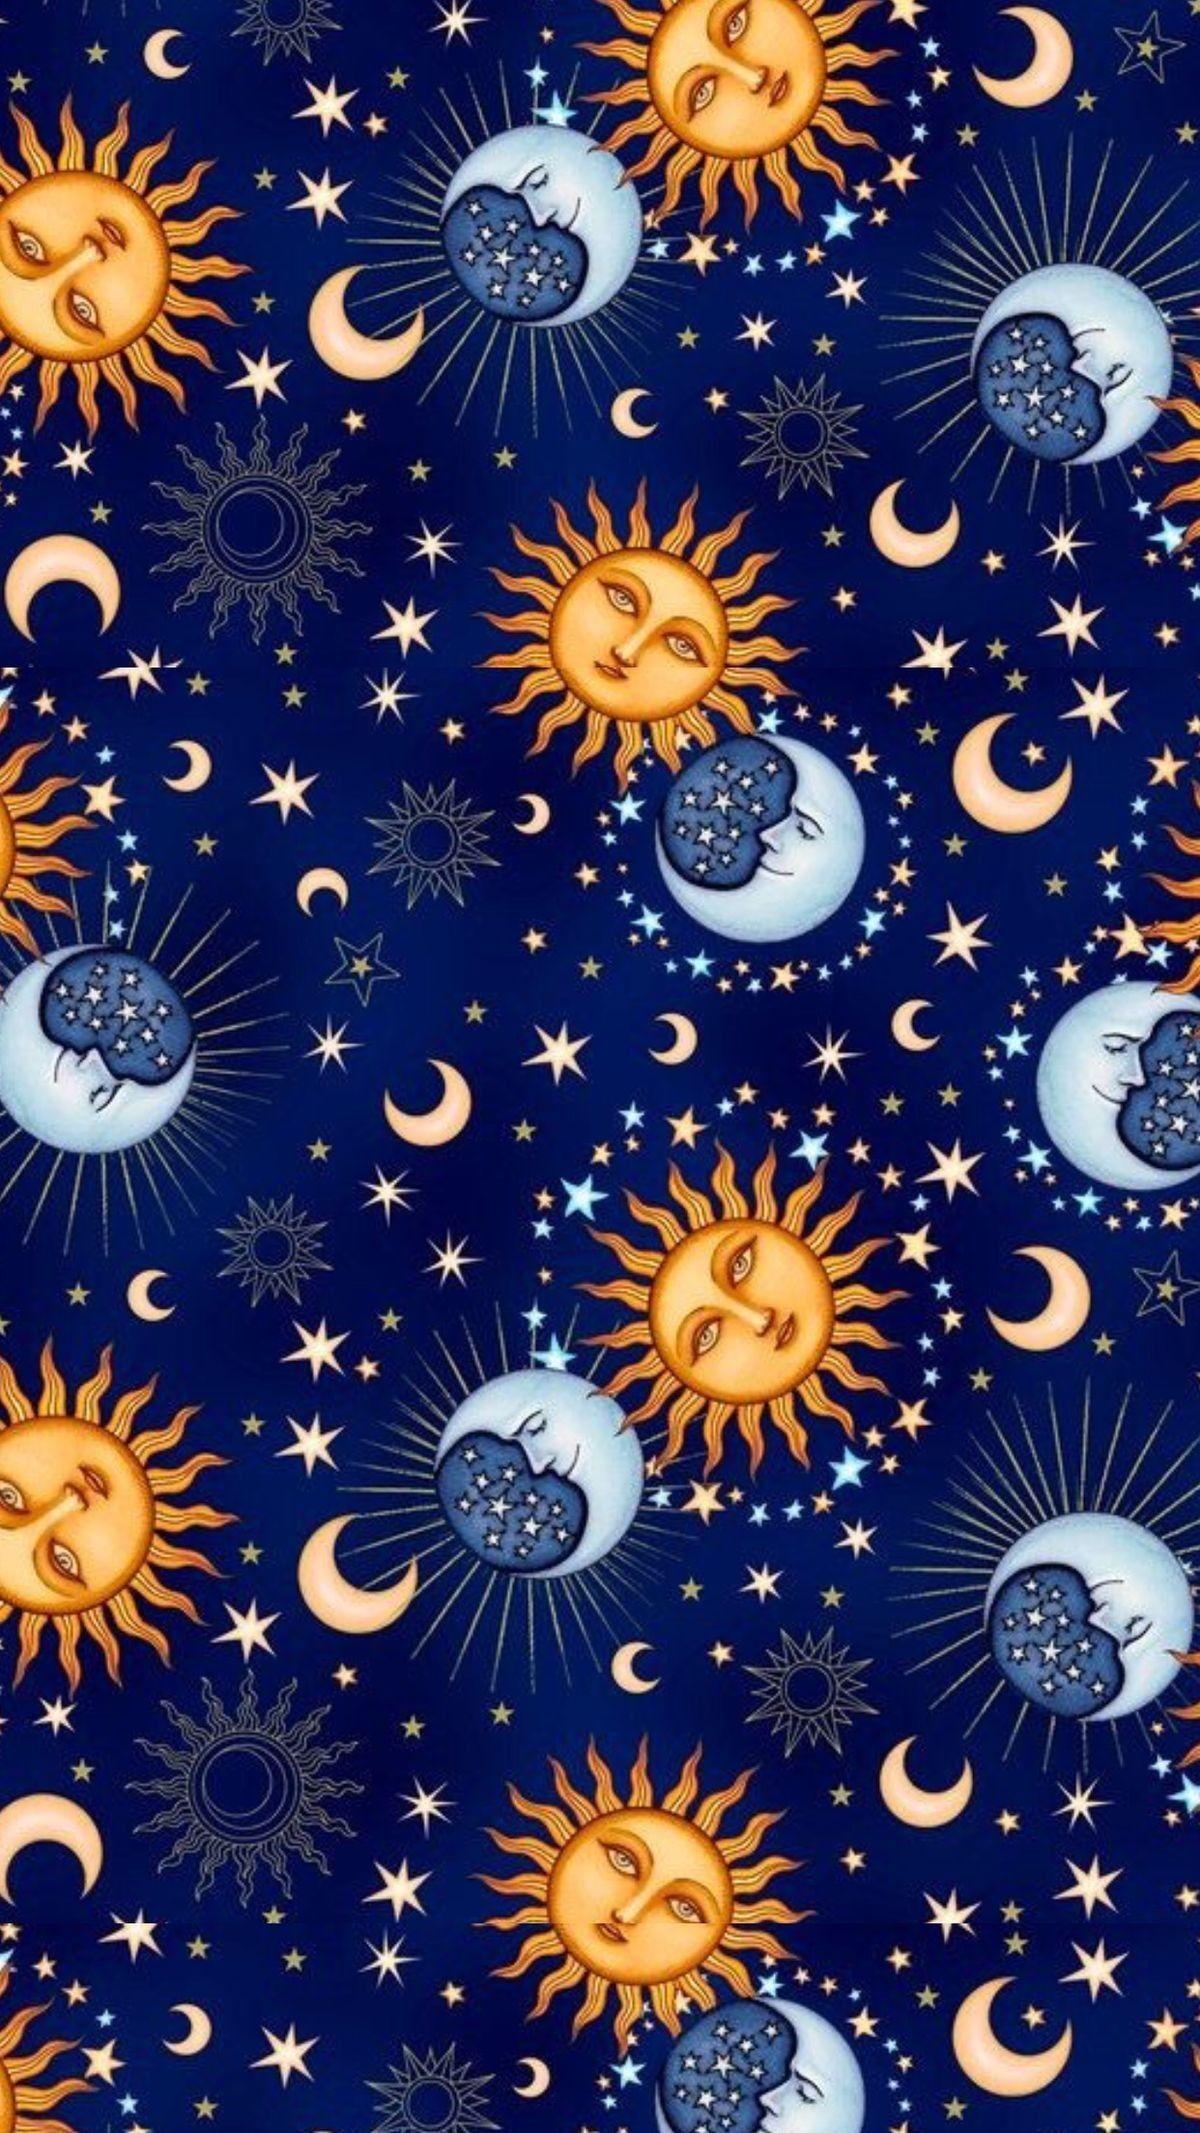 SUN AND MOON ON BLUE CRACKLED WALLPAPER BORDER 